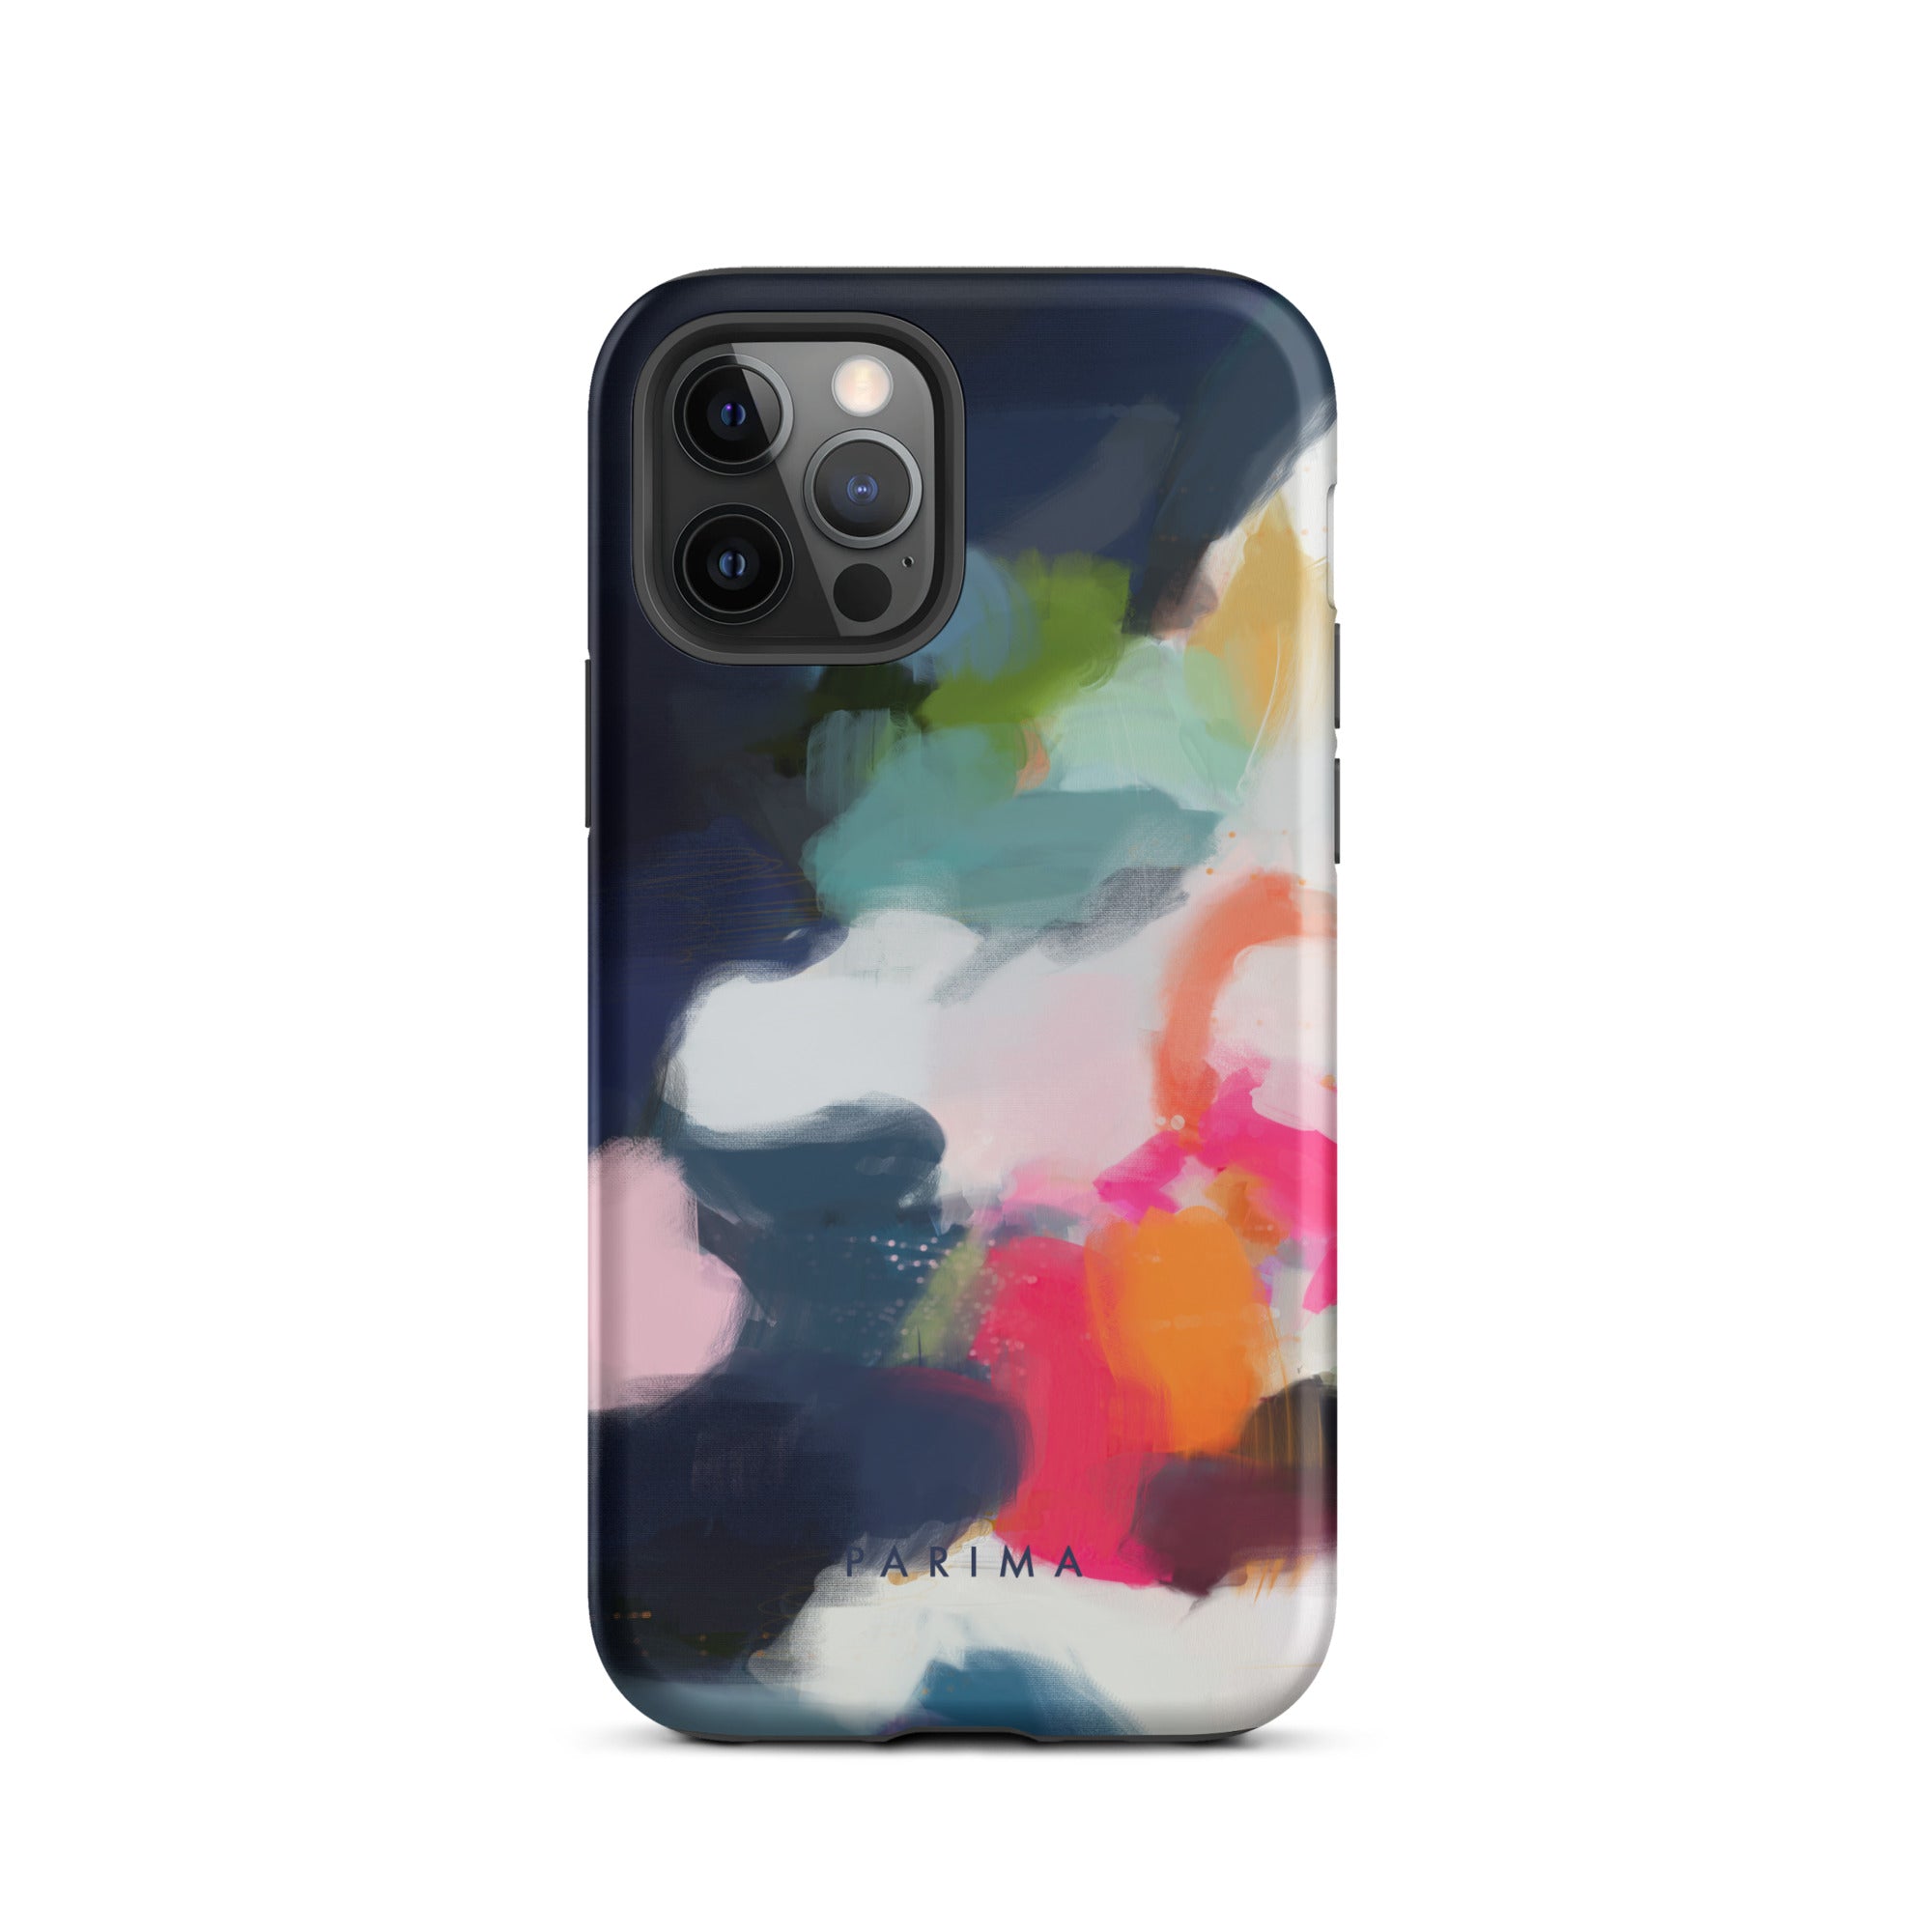 Eliza, pink and blue abstract art - iPhone 12 Pro tough case by Parima Studio